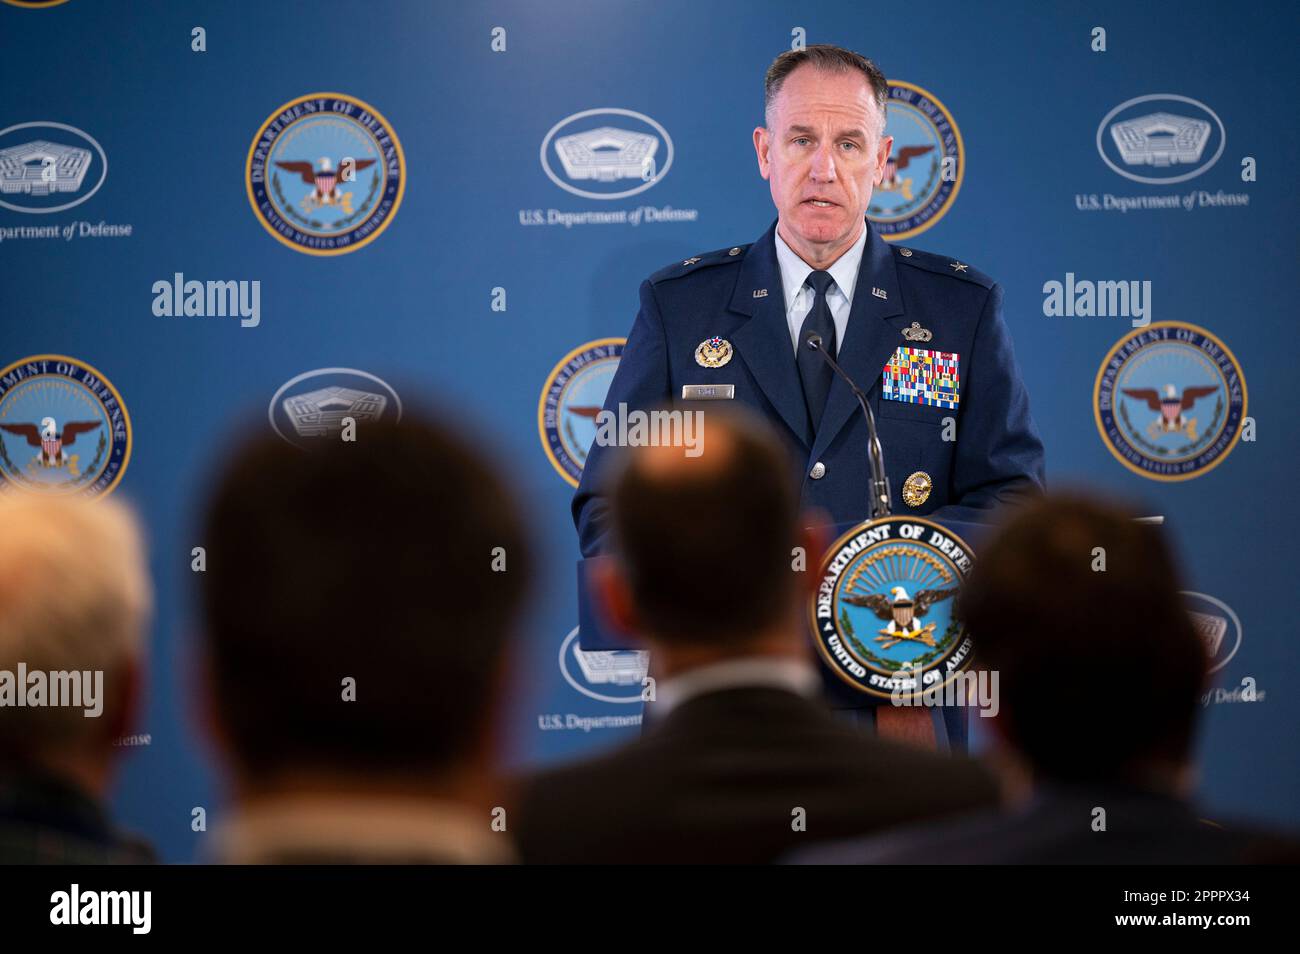 Arlington, United States Of America. 24th Apr, 2023. Arlington, United States of America. 24 April, 2023. Pentagon Press Secretary Air Force Brig. Gen. Pat Ryder responds to a question from a reporter during a press briefing at the Pentagon, April 24, 2023 in Arlington, Virginia. Ryder announced that Arleigh Burke-class guided-missile destroyer USS Truxtun is off the coast of Sudan following the evacuation of the U.S. Embassy in Khartoum. Credit: MC2 Alexander Kubitza/DOD/Alamy Live News Stock Photo